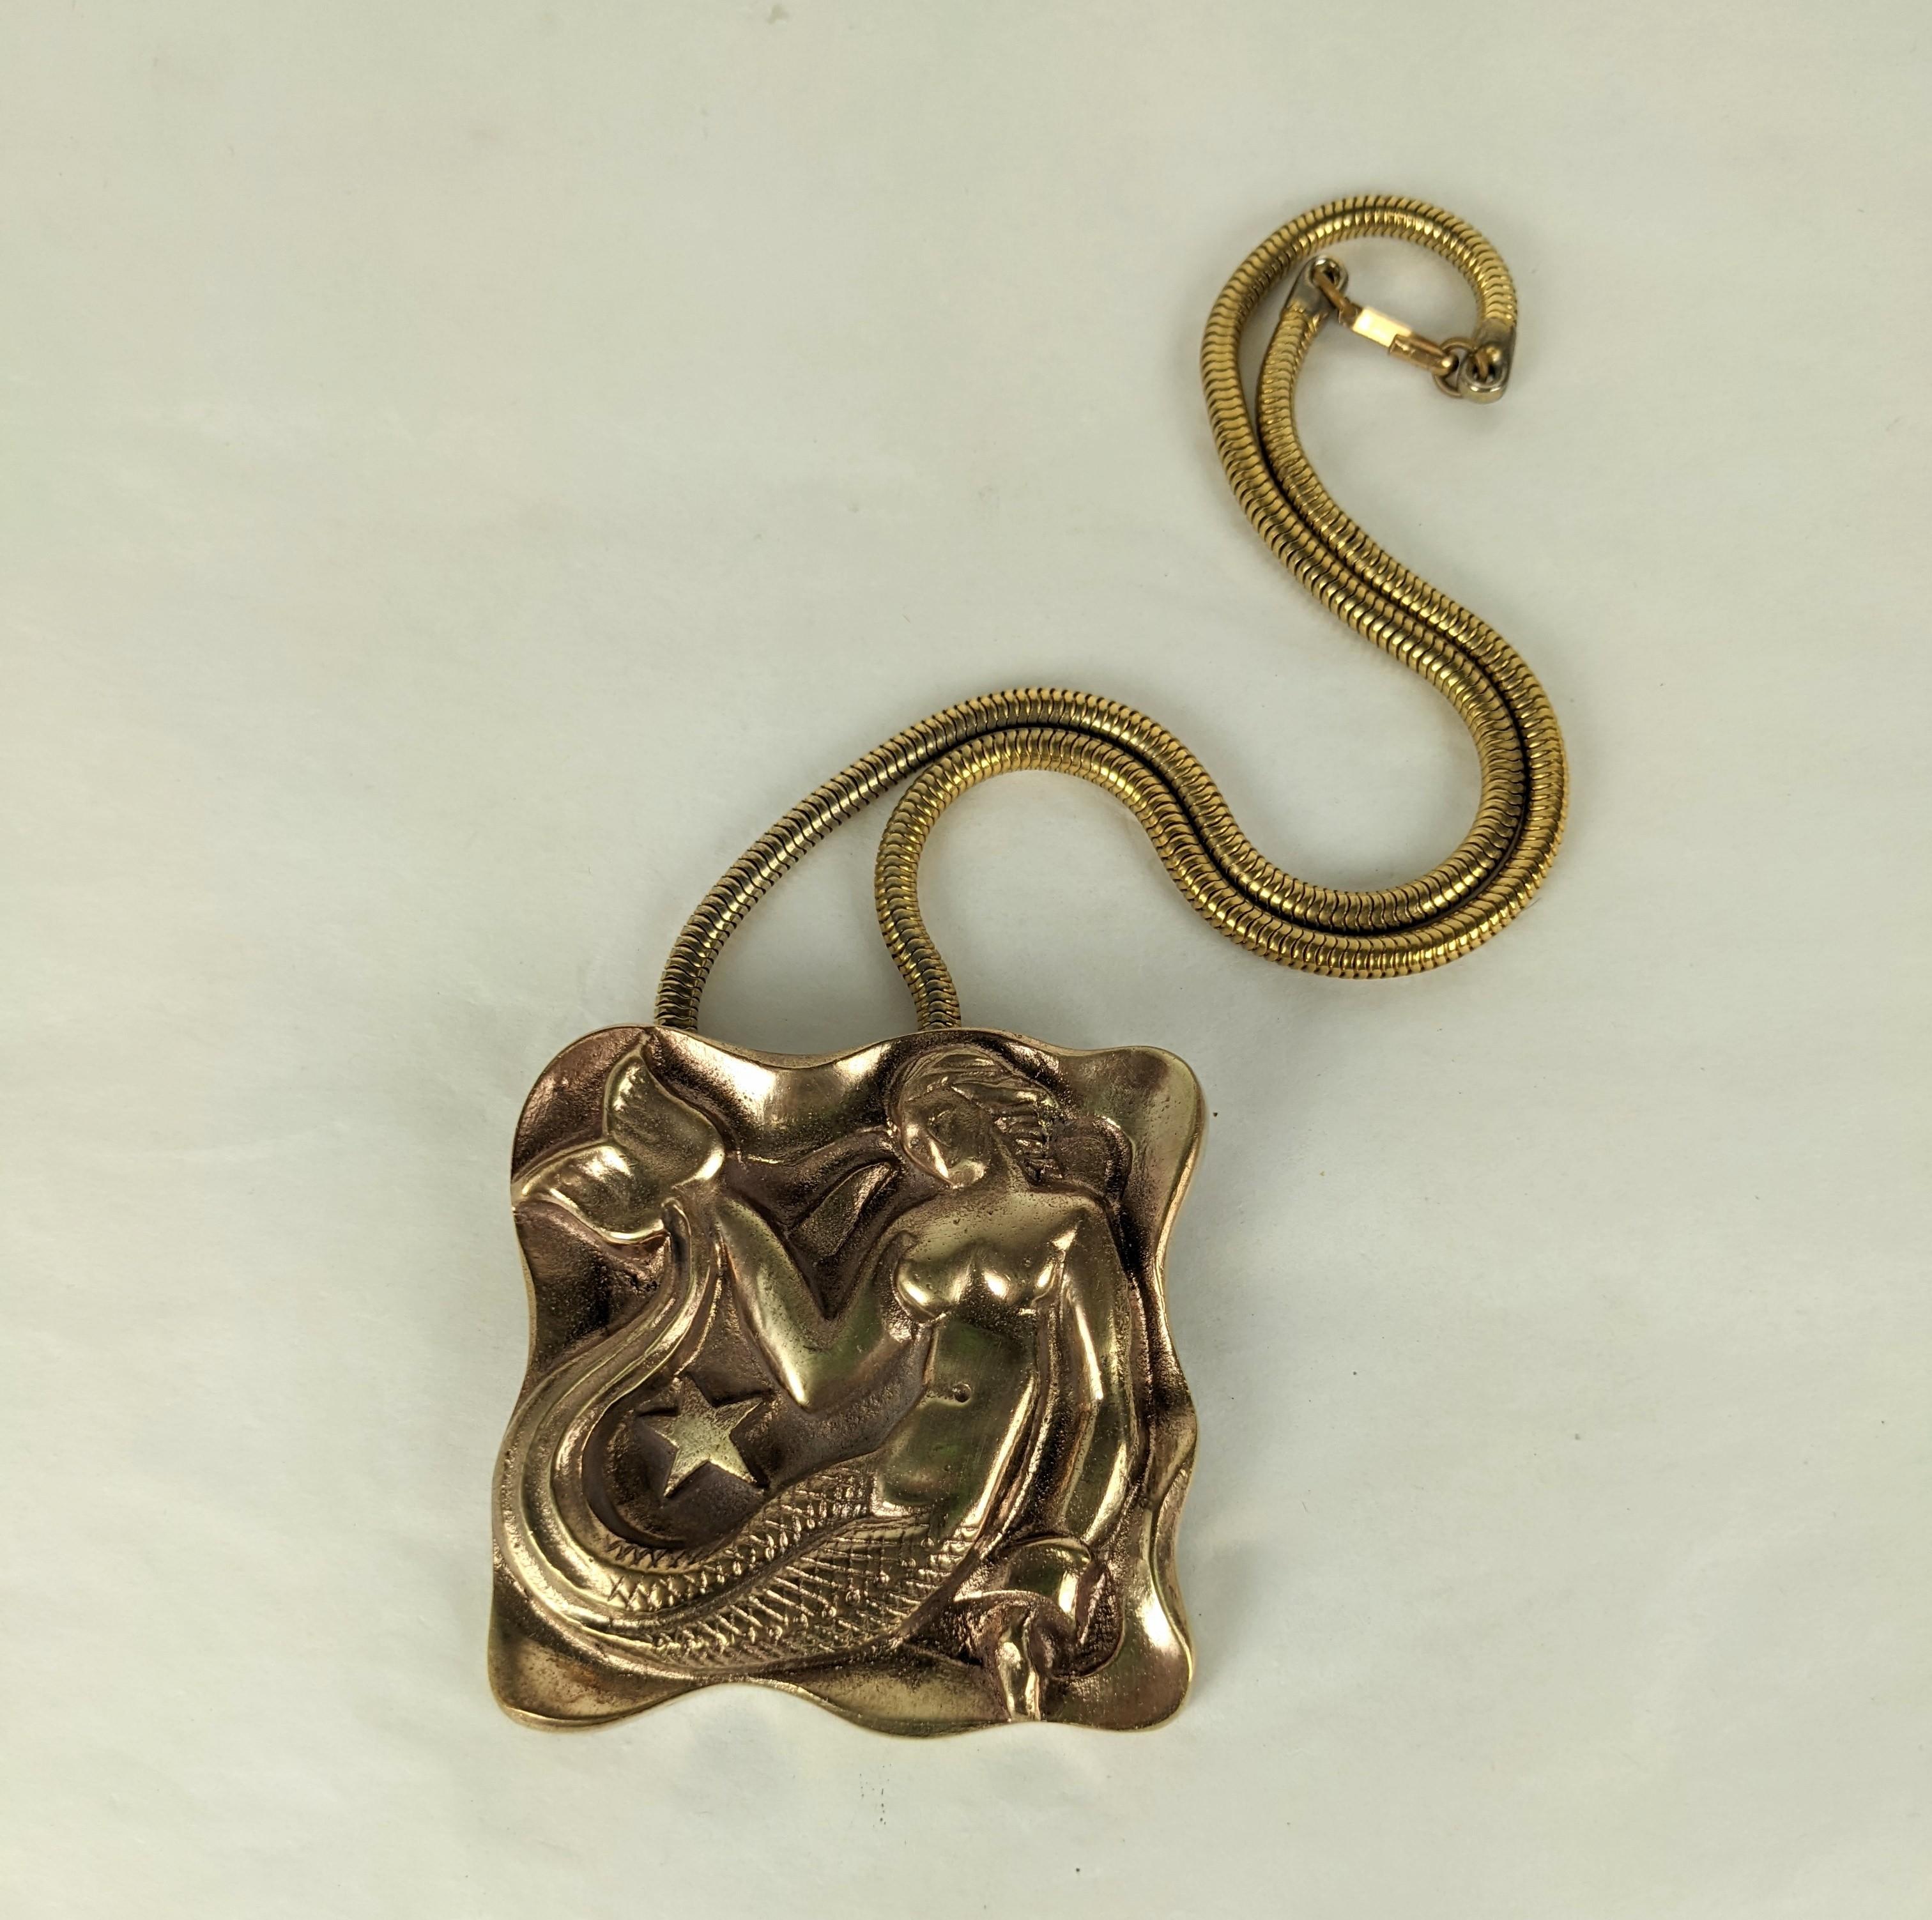 Unusual and striking French Art Deco Bronze Pendant converted from an antique furniture mount. An Art Deco mermaid is beautifully modeled around a star in this bronze pendant. A matching period Retro snake chain has been added to the pendant.